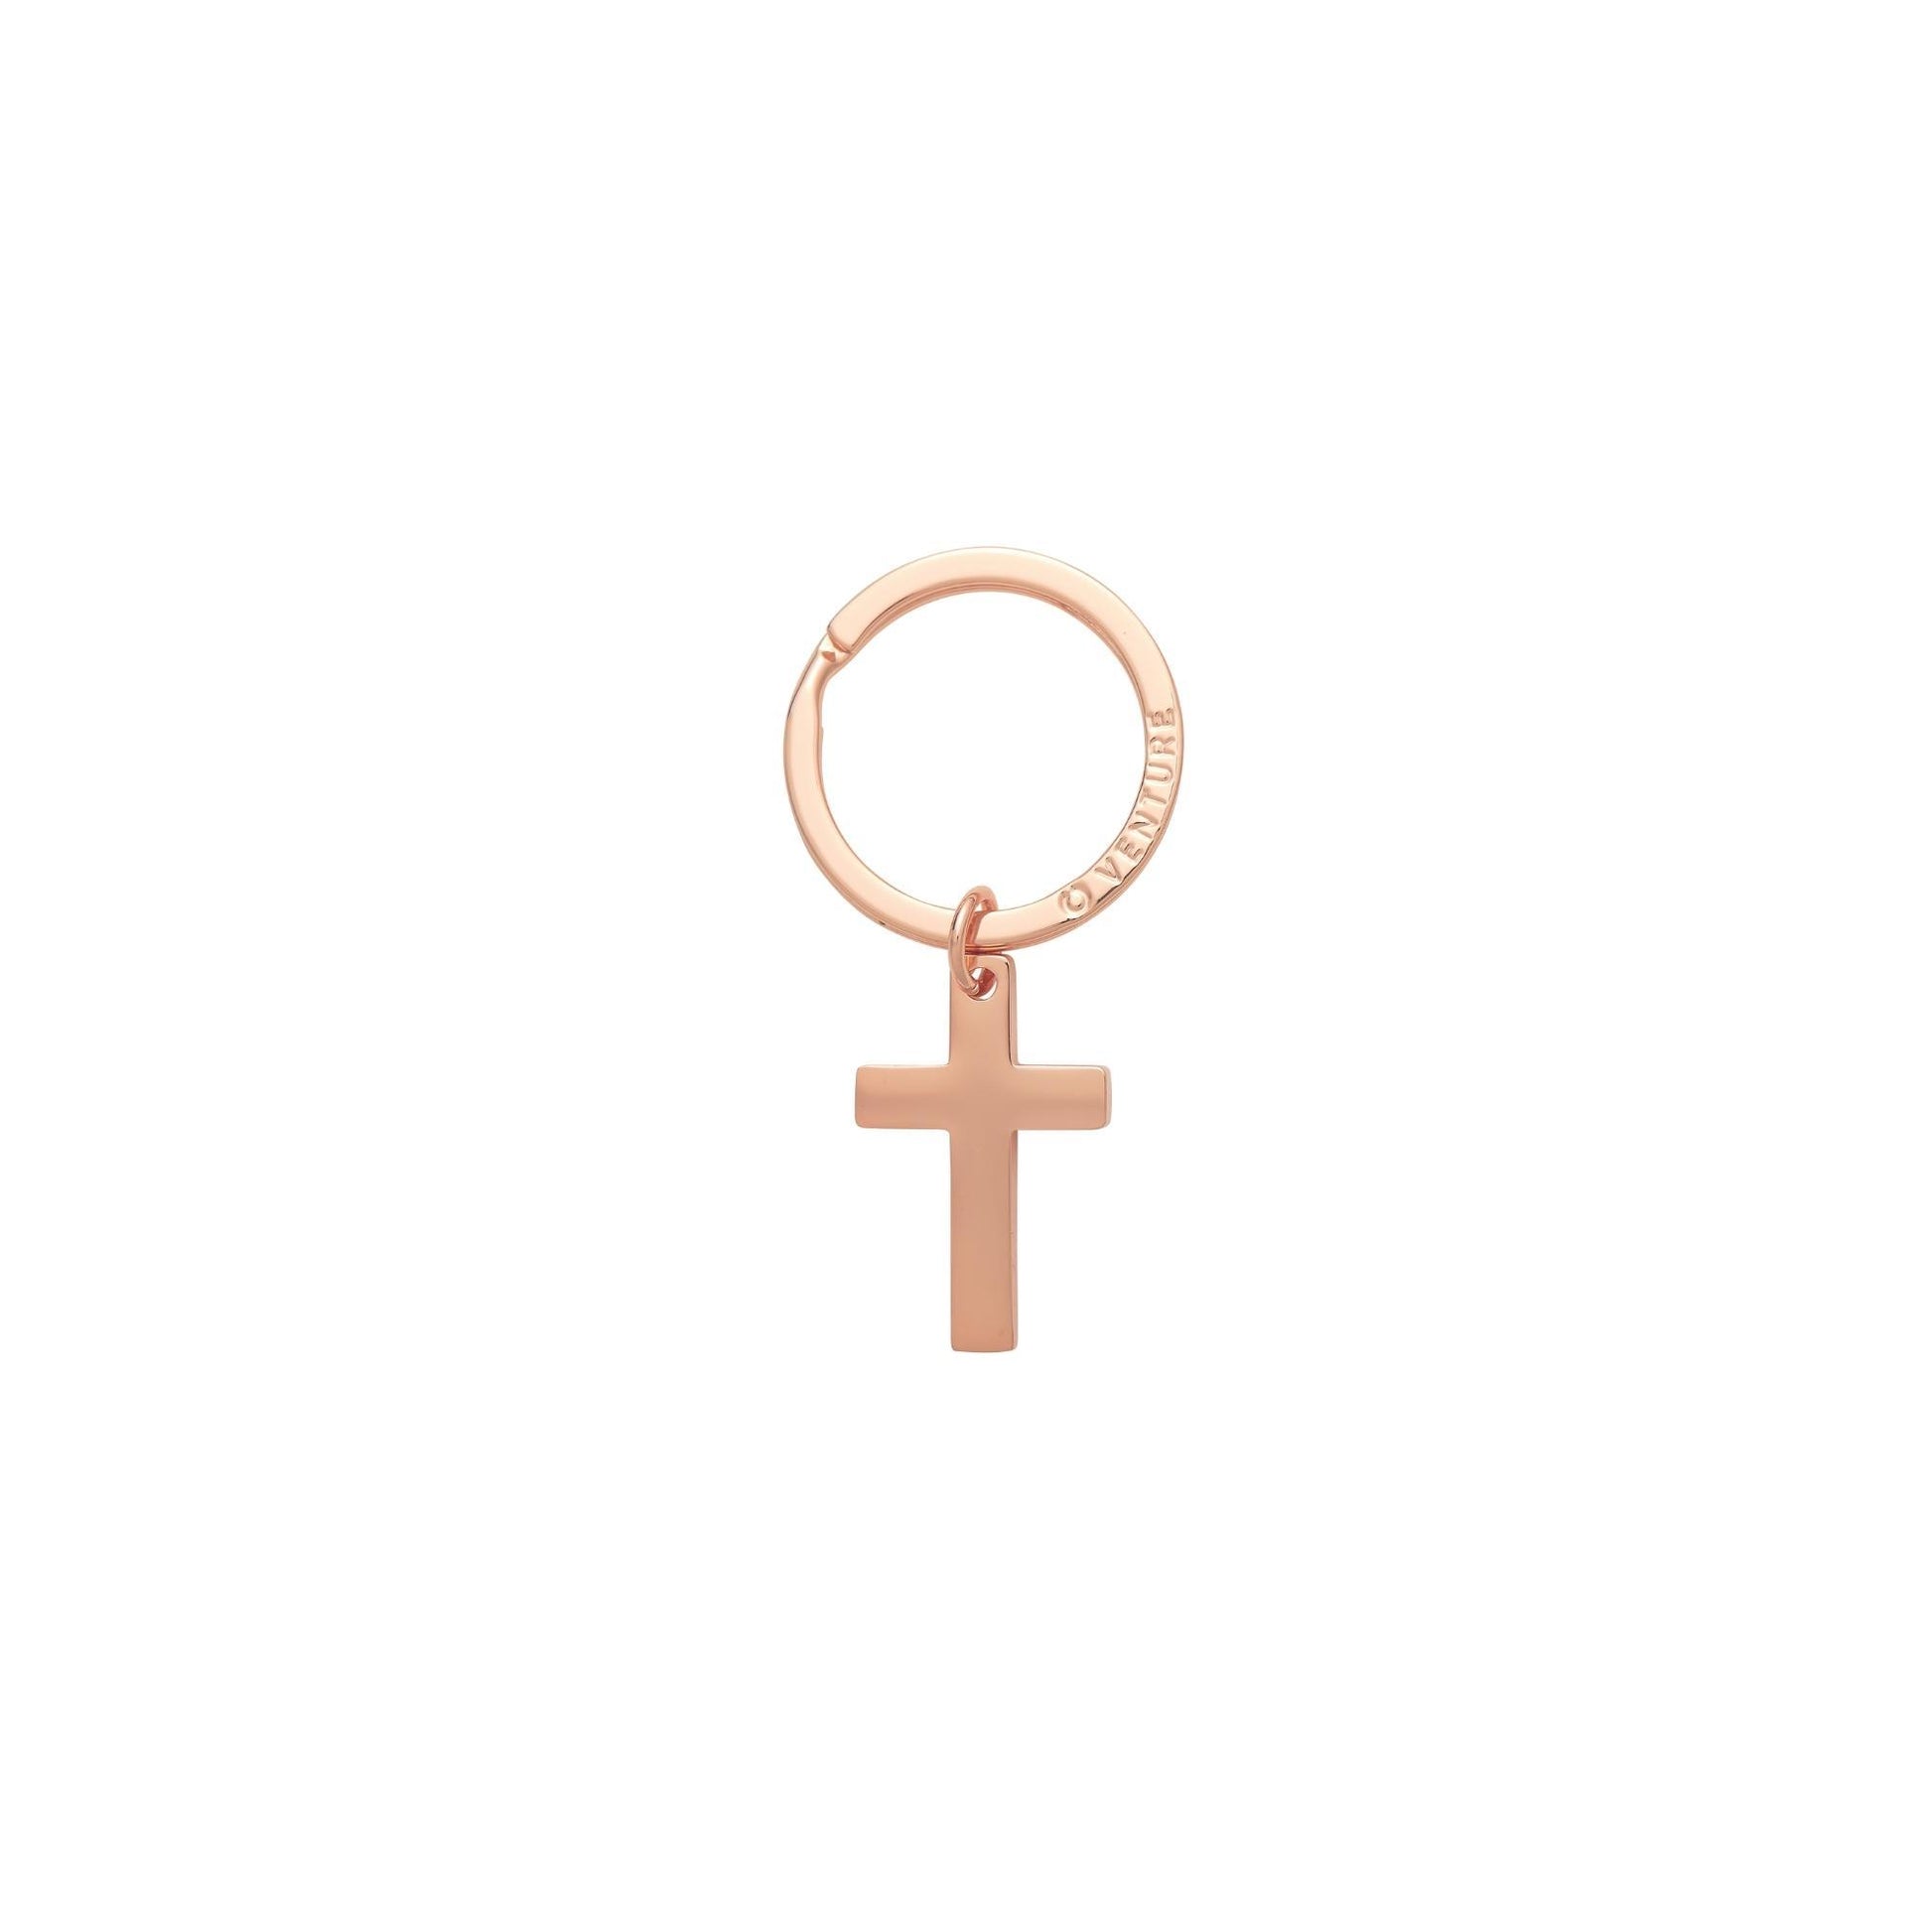 Cross key chain in rose gold finish. This keyring can stand alone or be attached to a big o key ring as a charm.